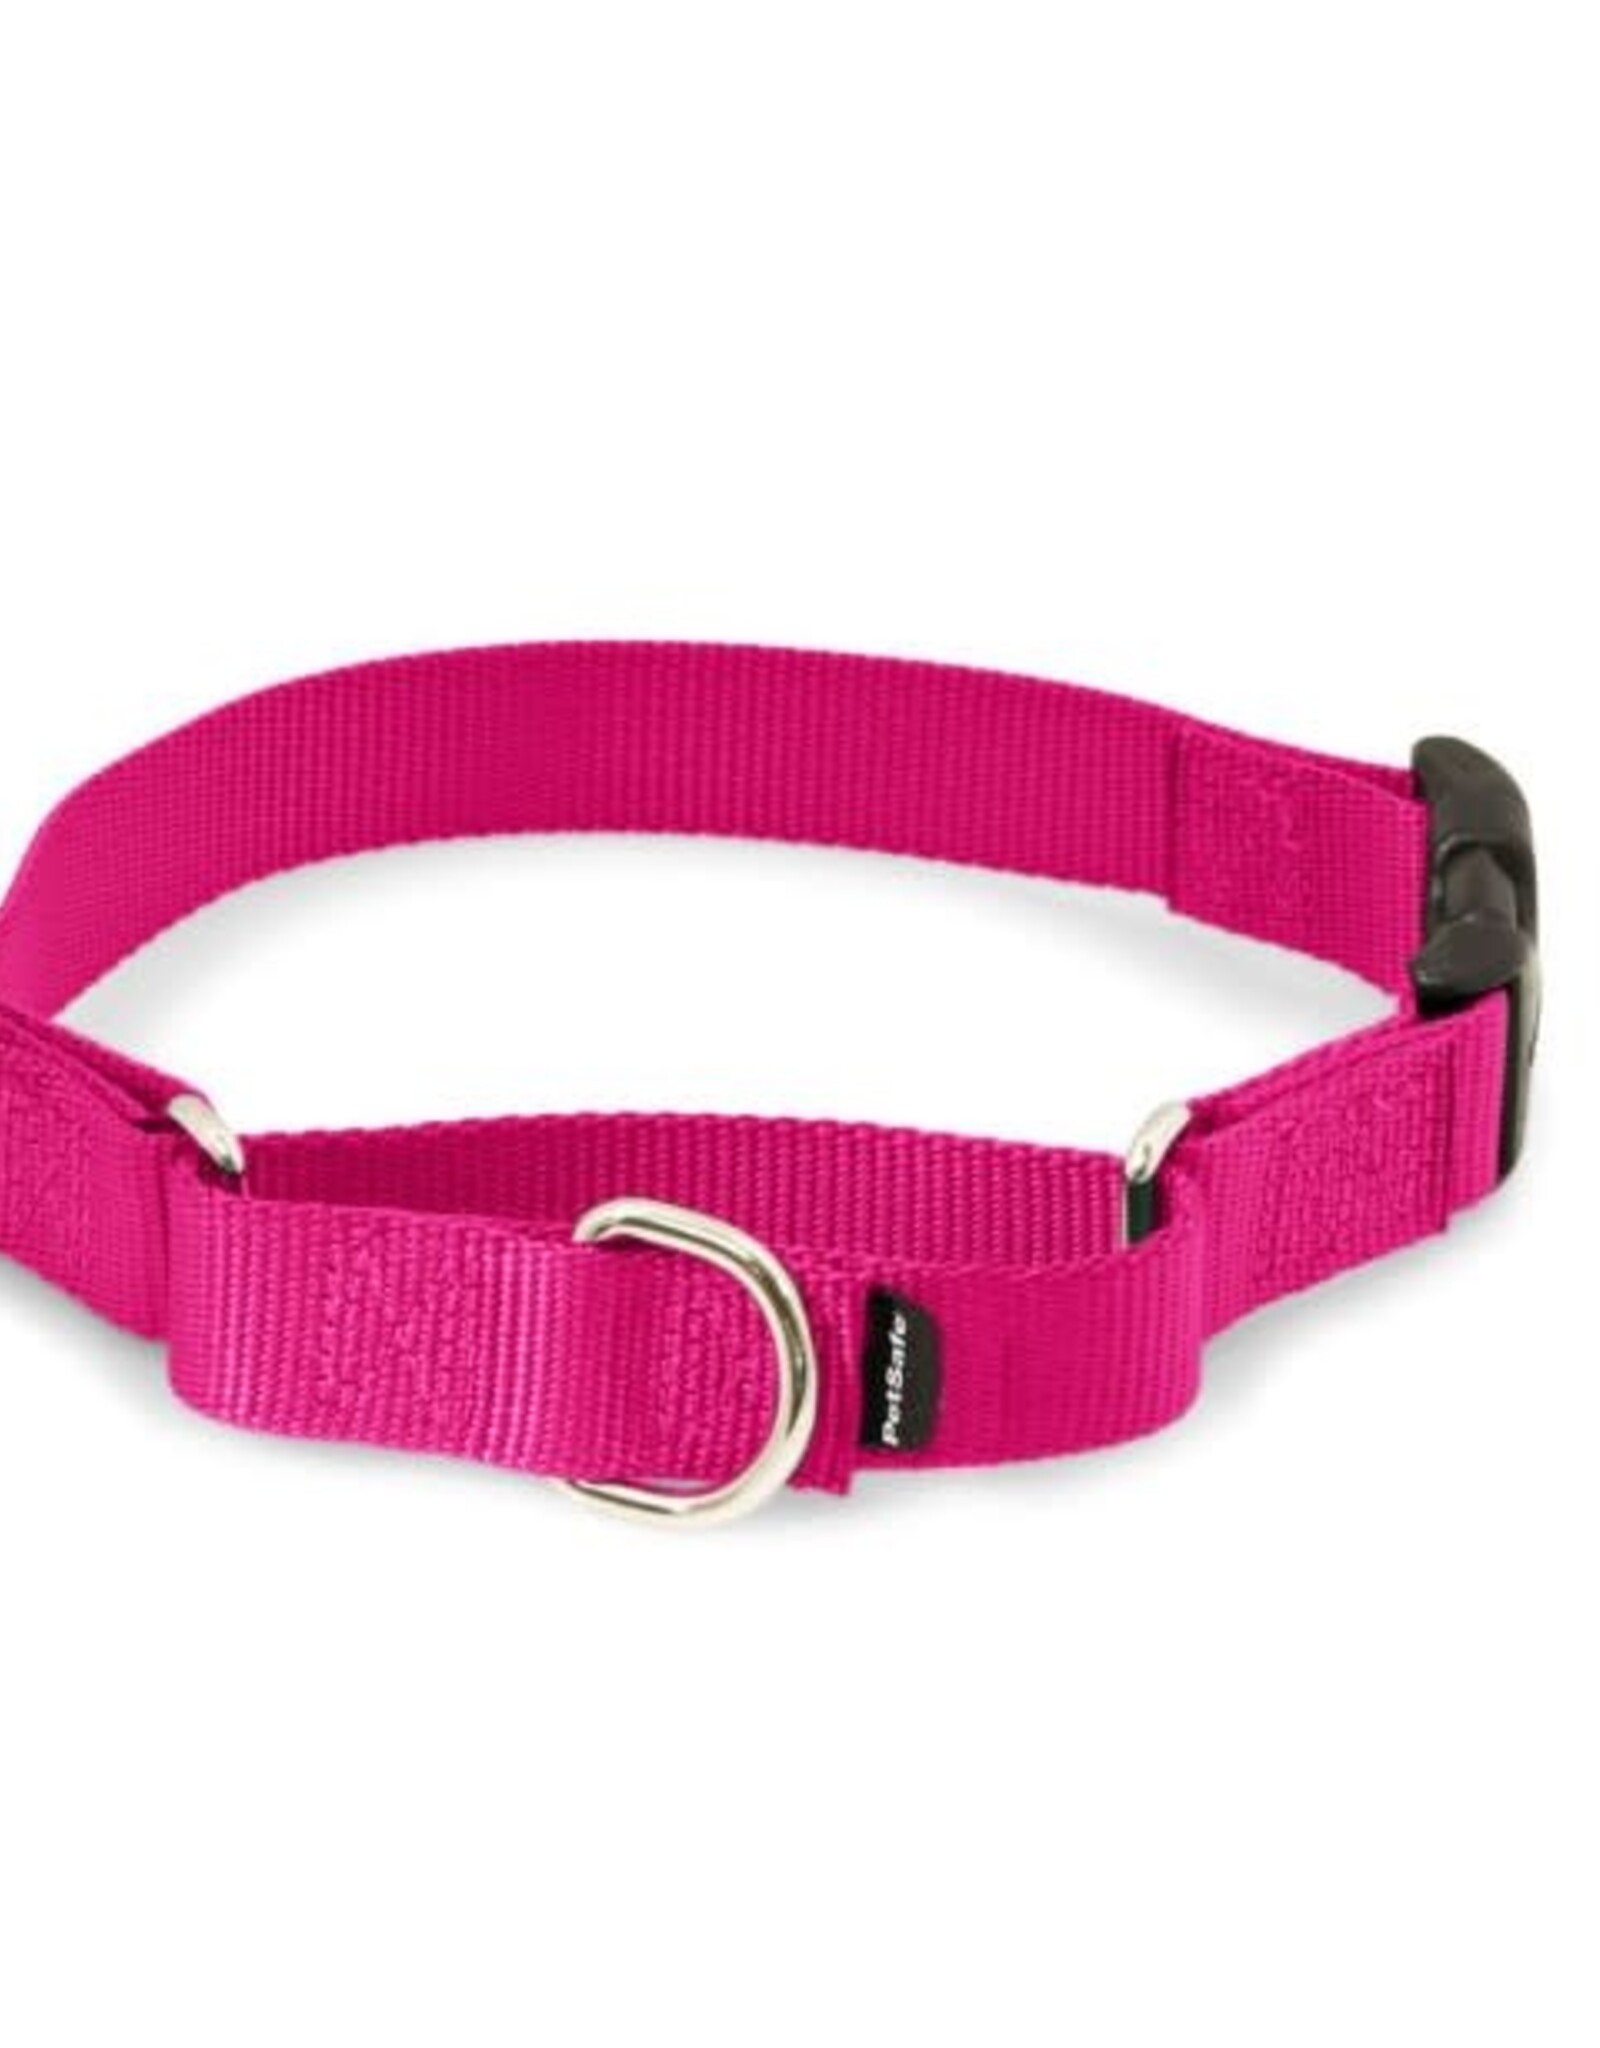 RADIO SYSTEMS CORP(PET SAFE) Premier Quick Snap Large 1 inch Raspberry